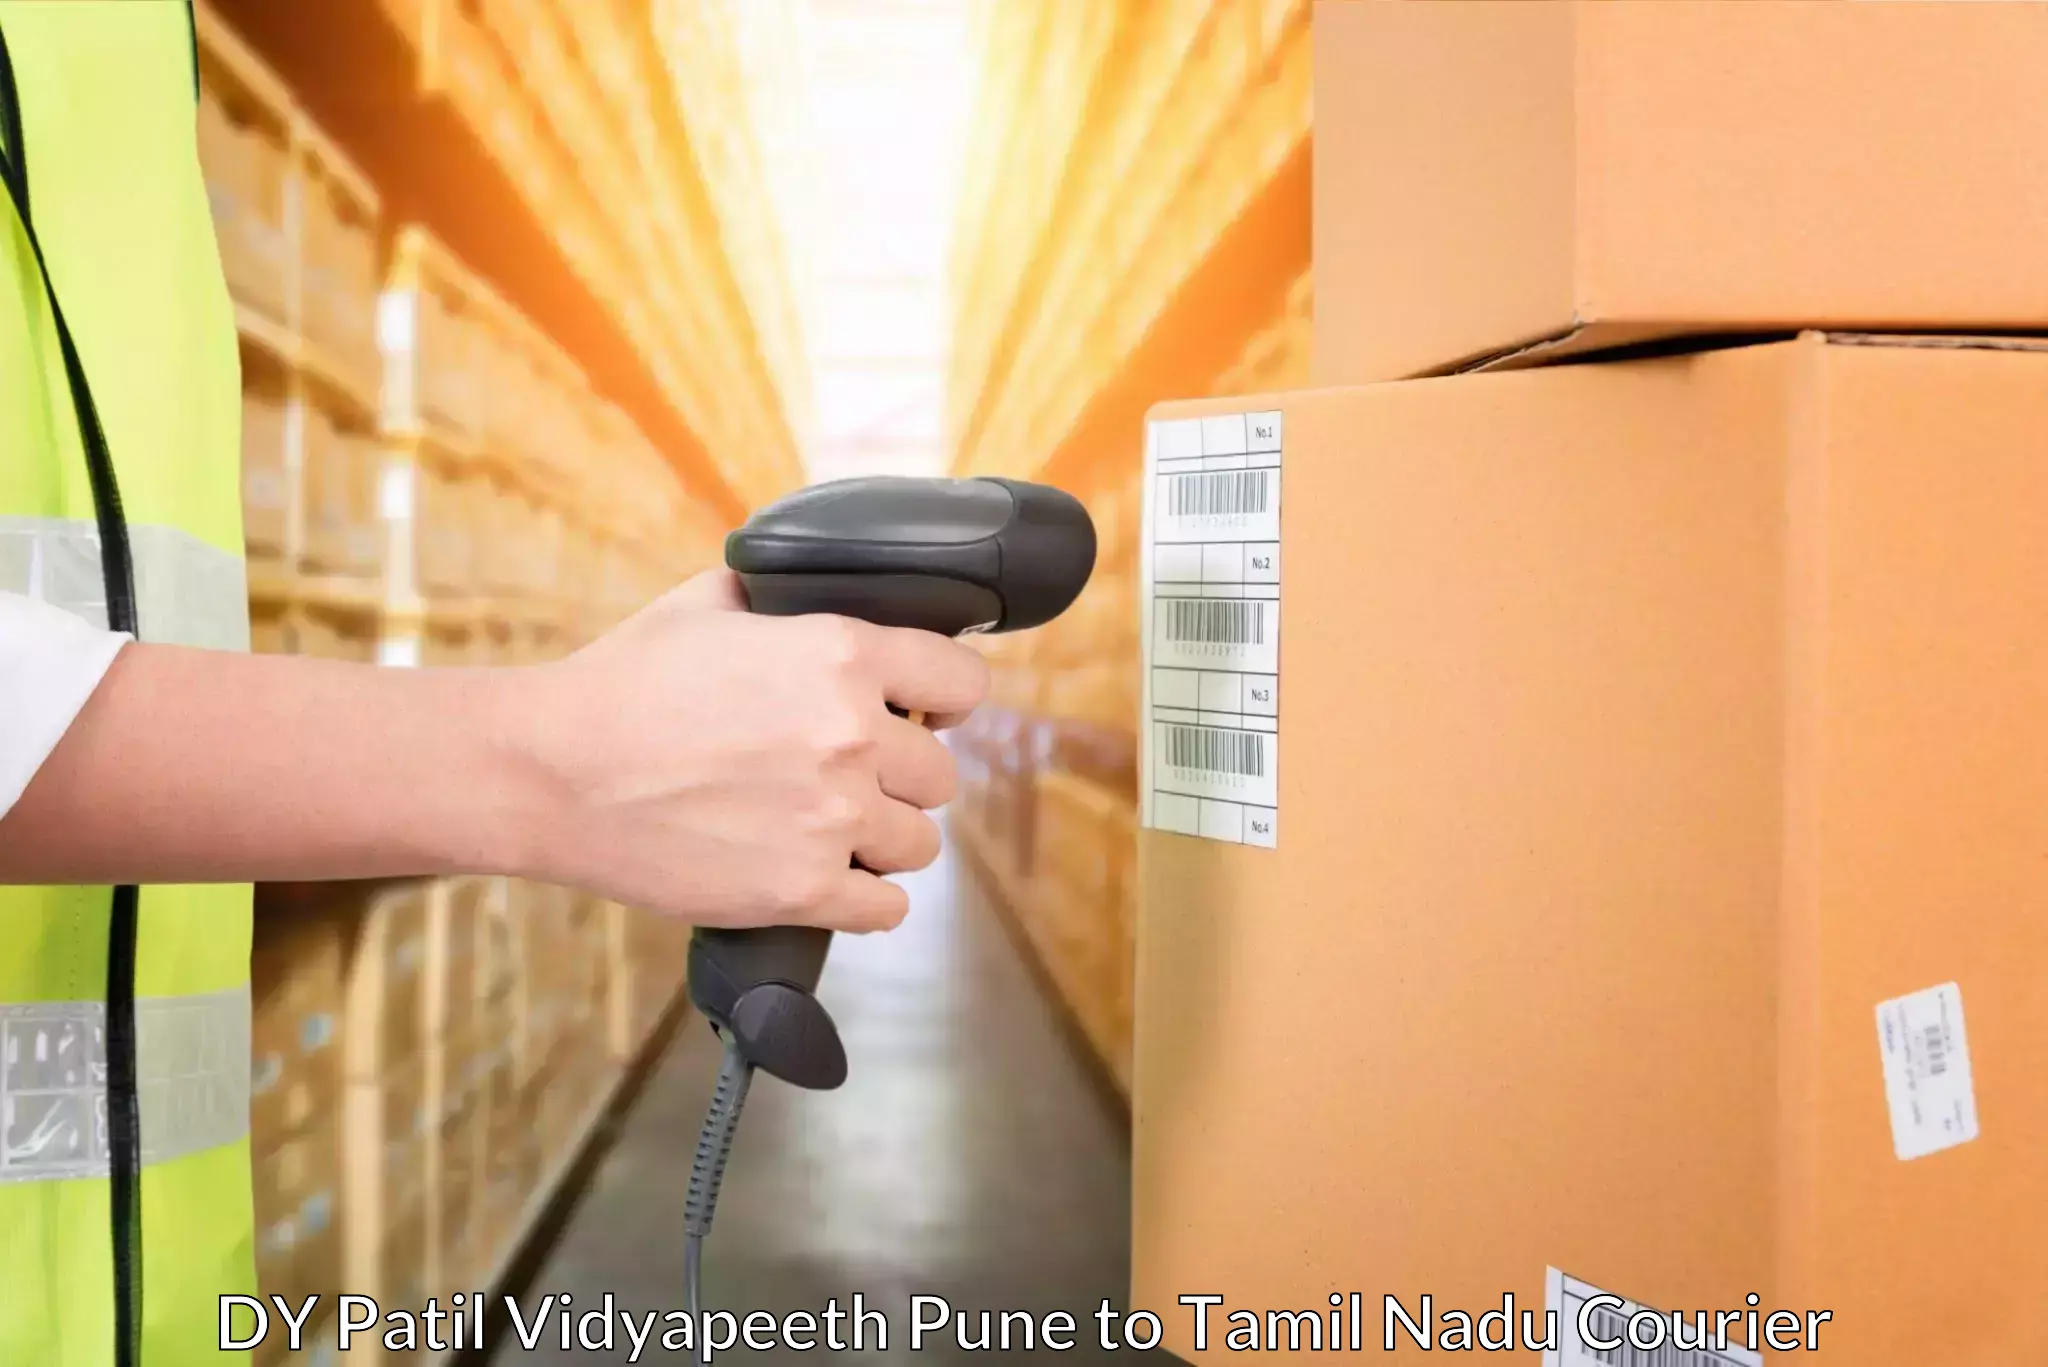 Reliable freight solutions DY Patil Vidyapeeth Pune to Tamil Nadu